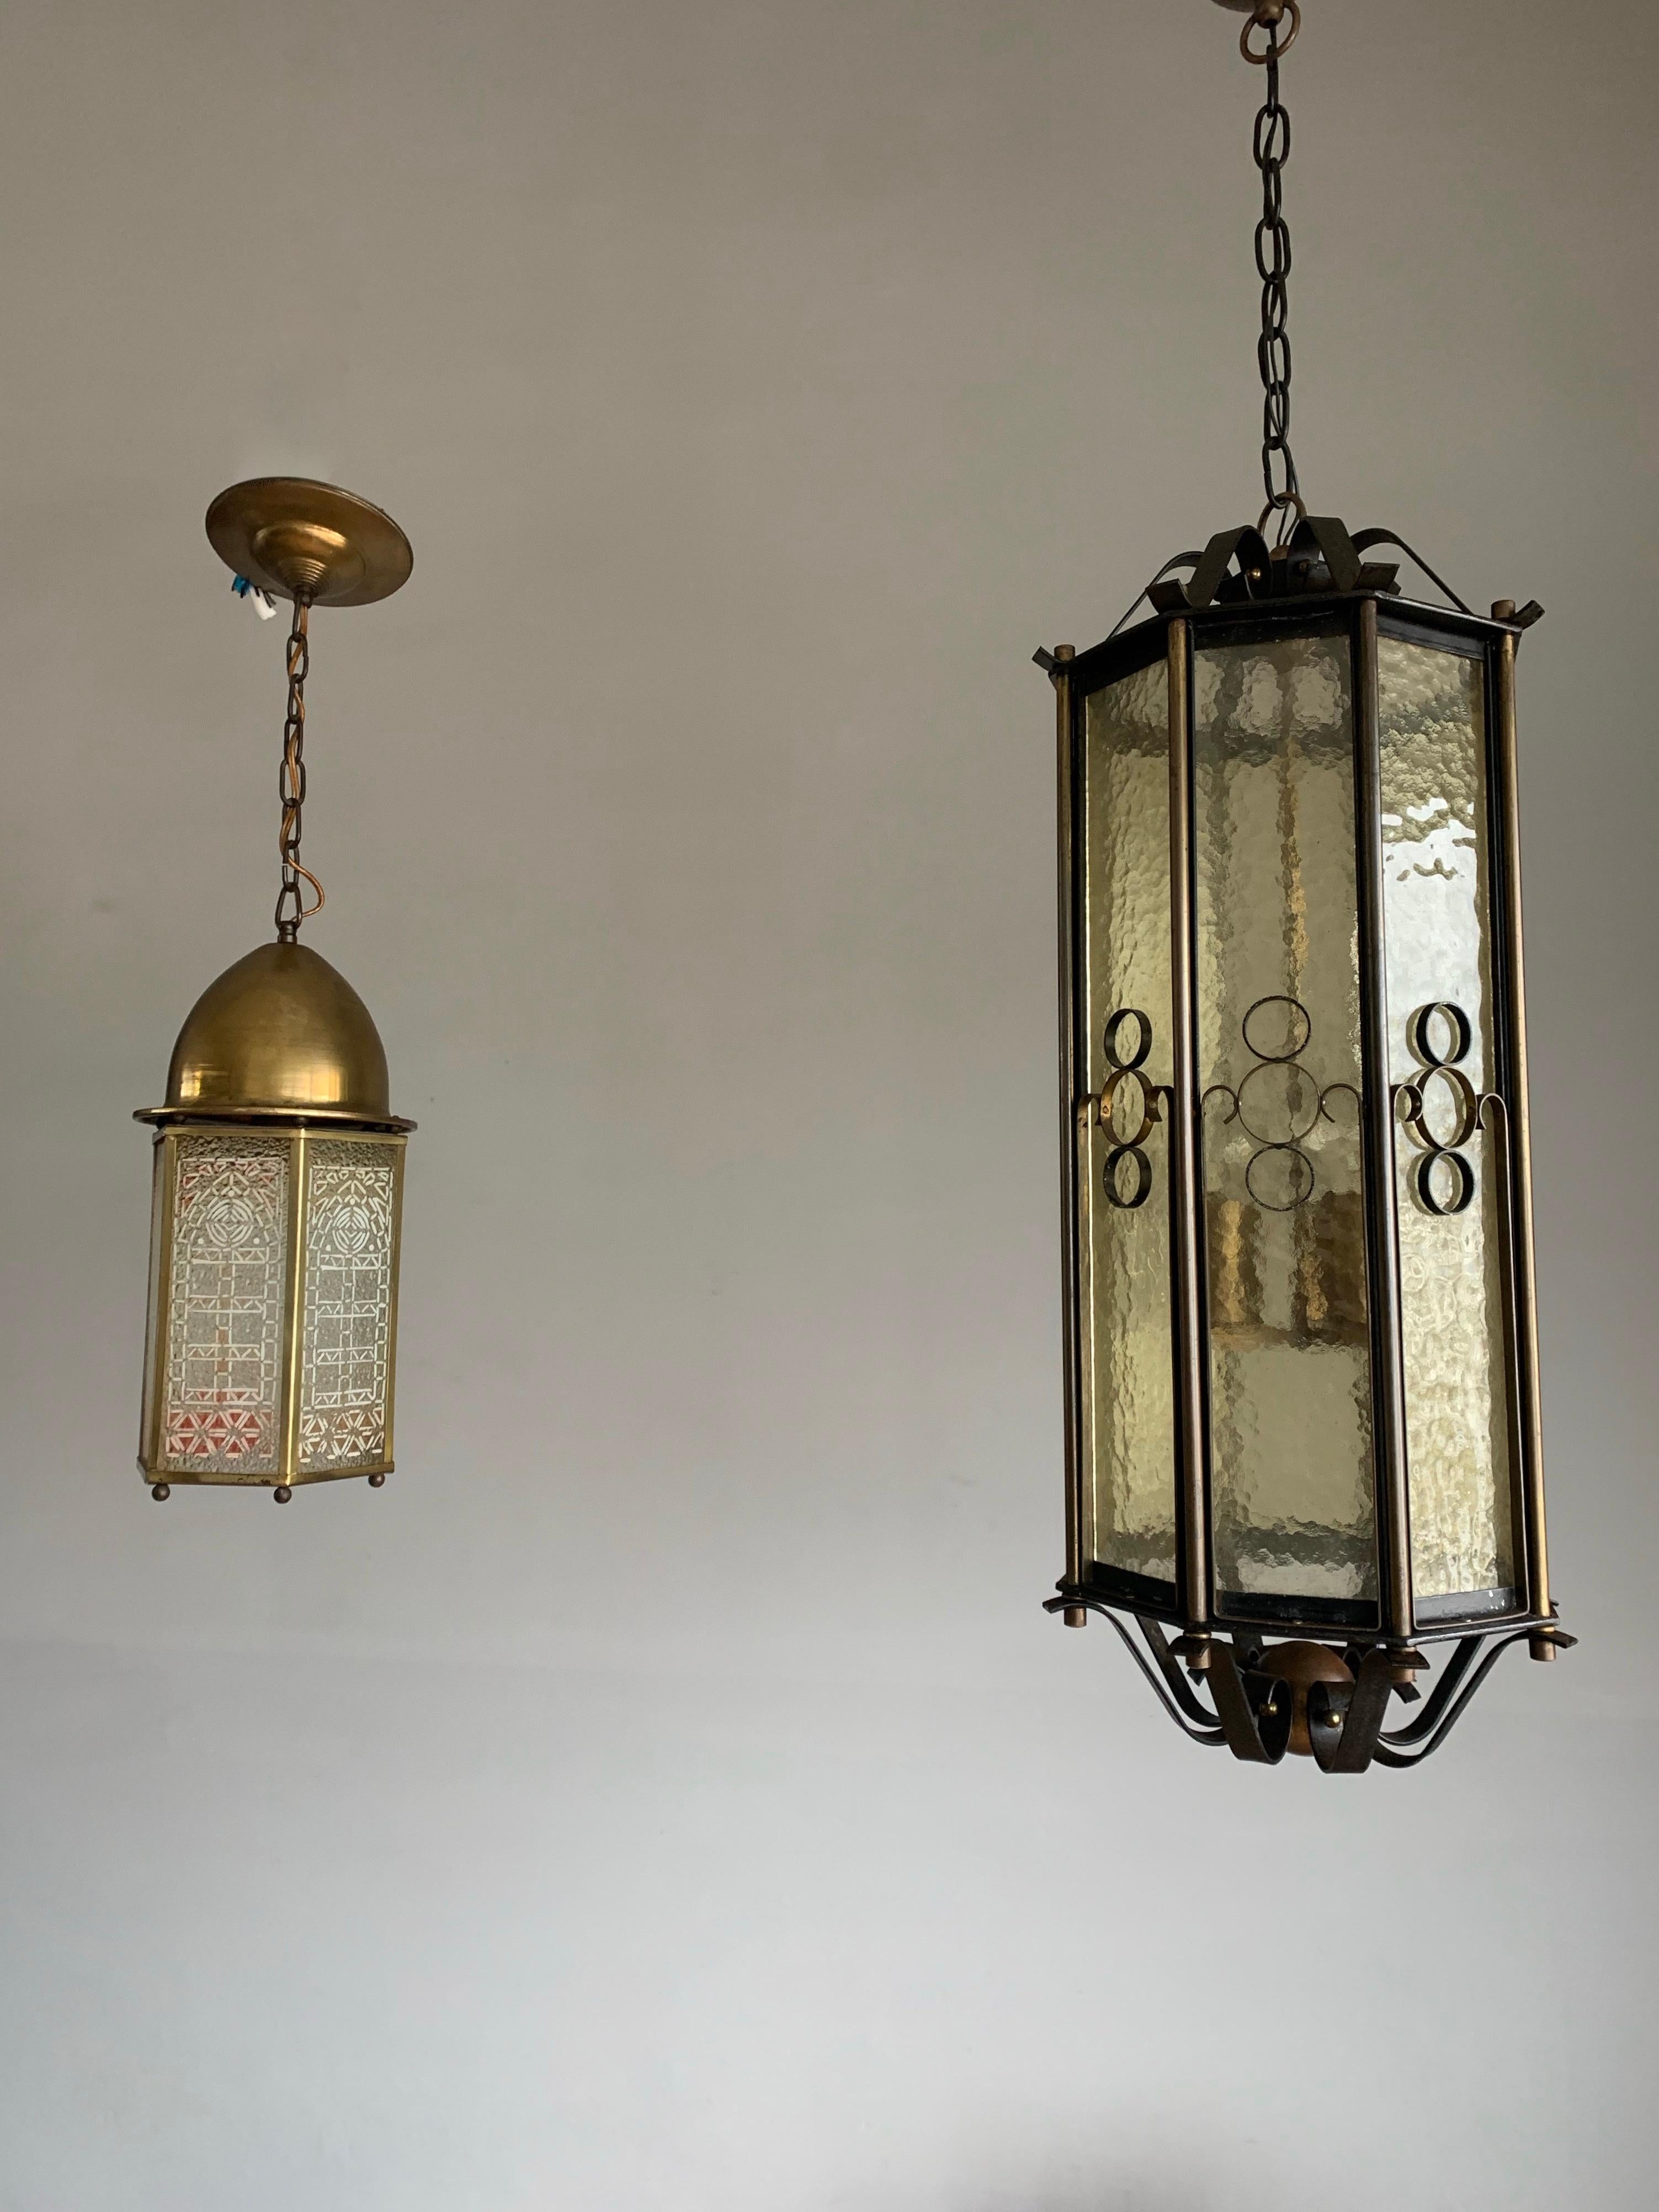 Extra Large Brass and Wrought Iron Lantern / Pendant with Cathedral Glass, 1930s For Sale 3